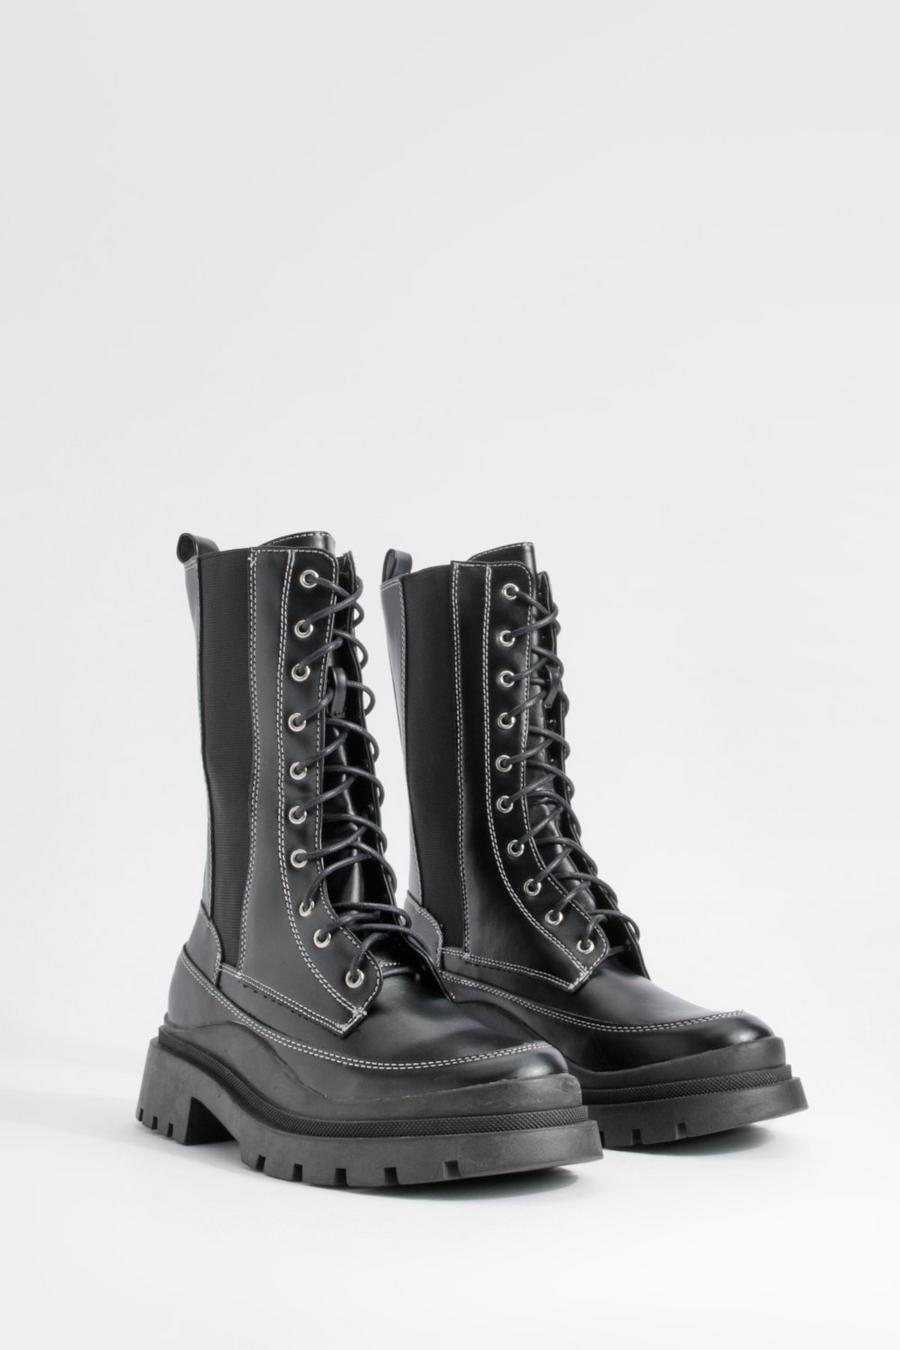 Black Chunky Calf High Lace Up Combat Boots